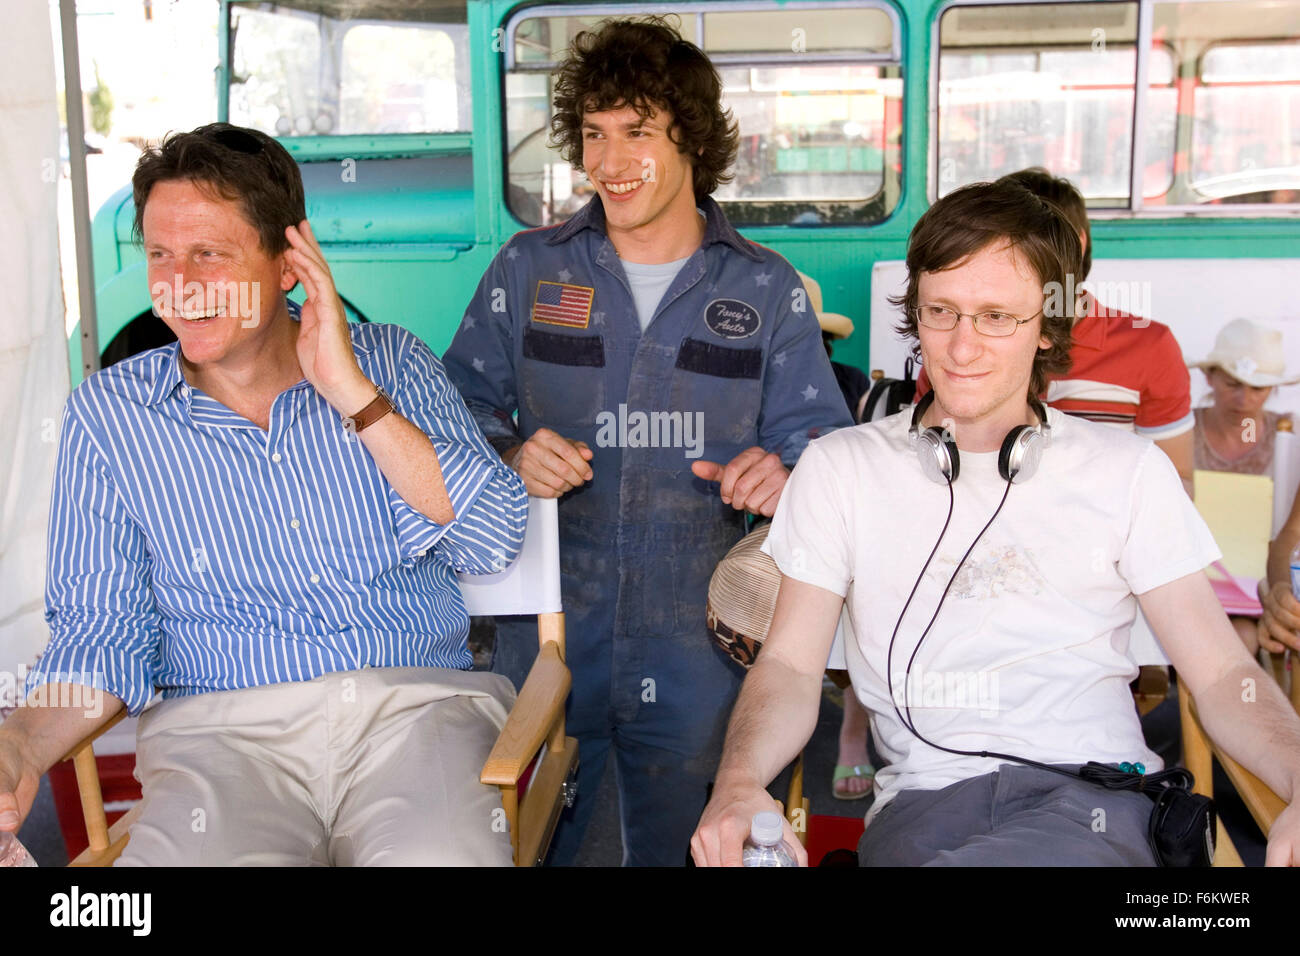 RELEASE DATE: June 1, 2007. MOVIE TITLE: Hot Rod - STUDIO: Paramount Pictures. PLOT: An accident-prone daredevil (Samberg) plans to jump the Snake River on a moped in order to win over his stepfather. PICTURED: Producer JOHN GOLDWYN, ANDY SAMBERG, and Director AKIVA SCHAFFER on the set. Stock Photo